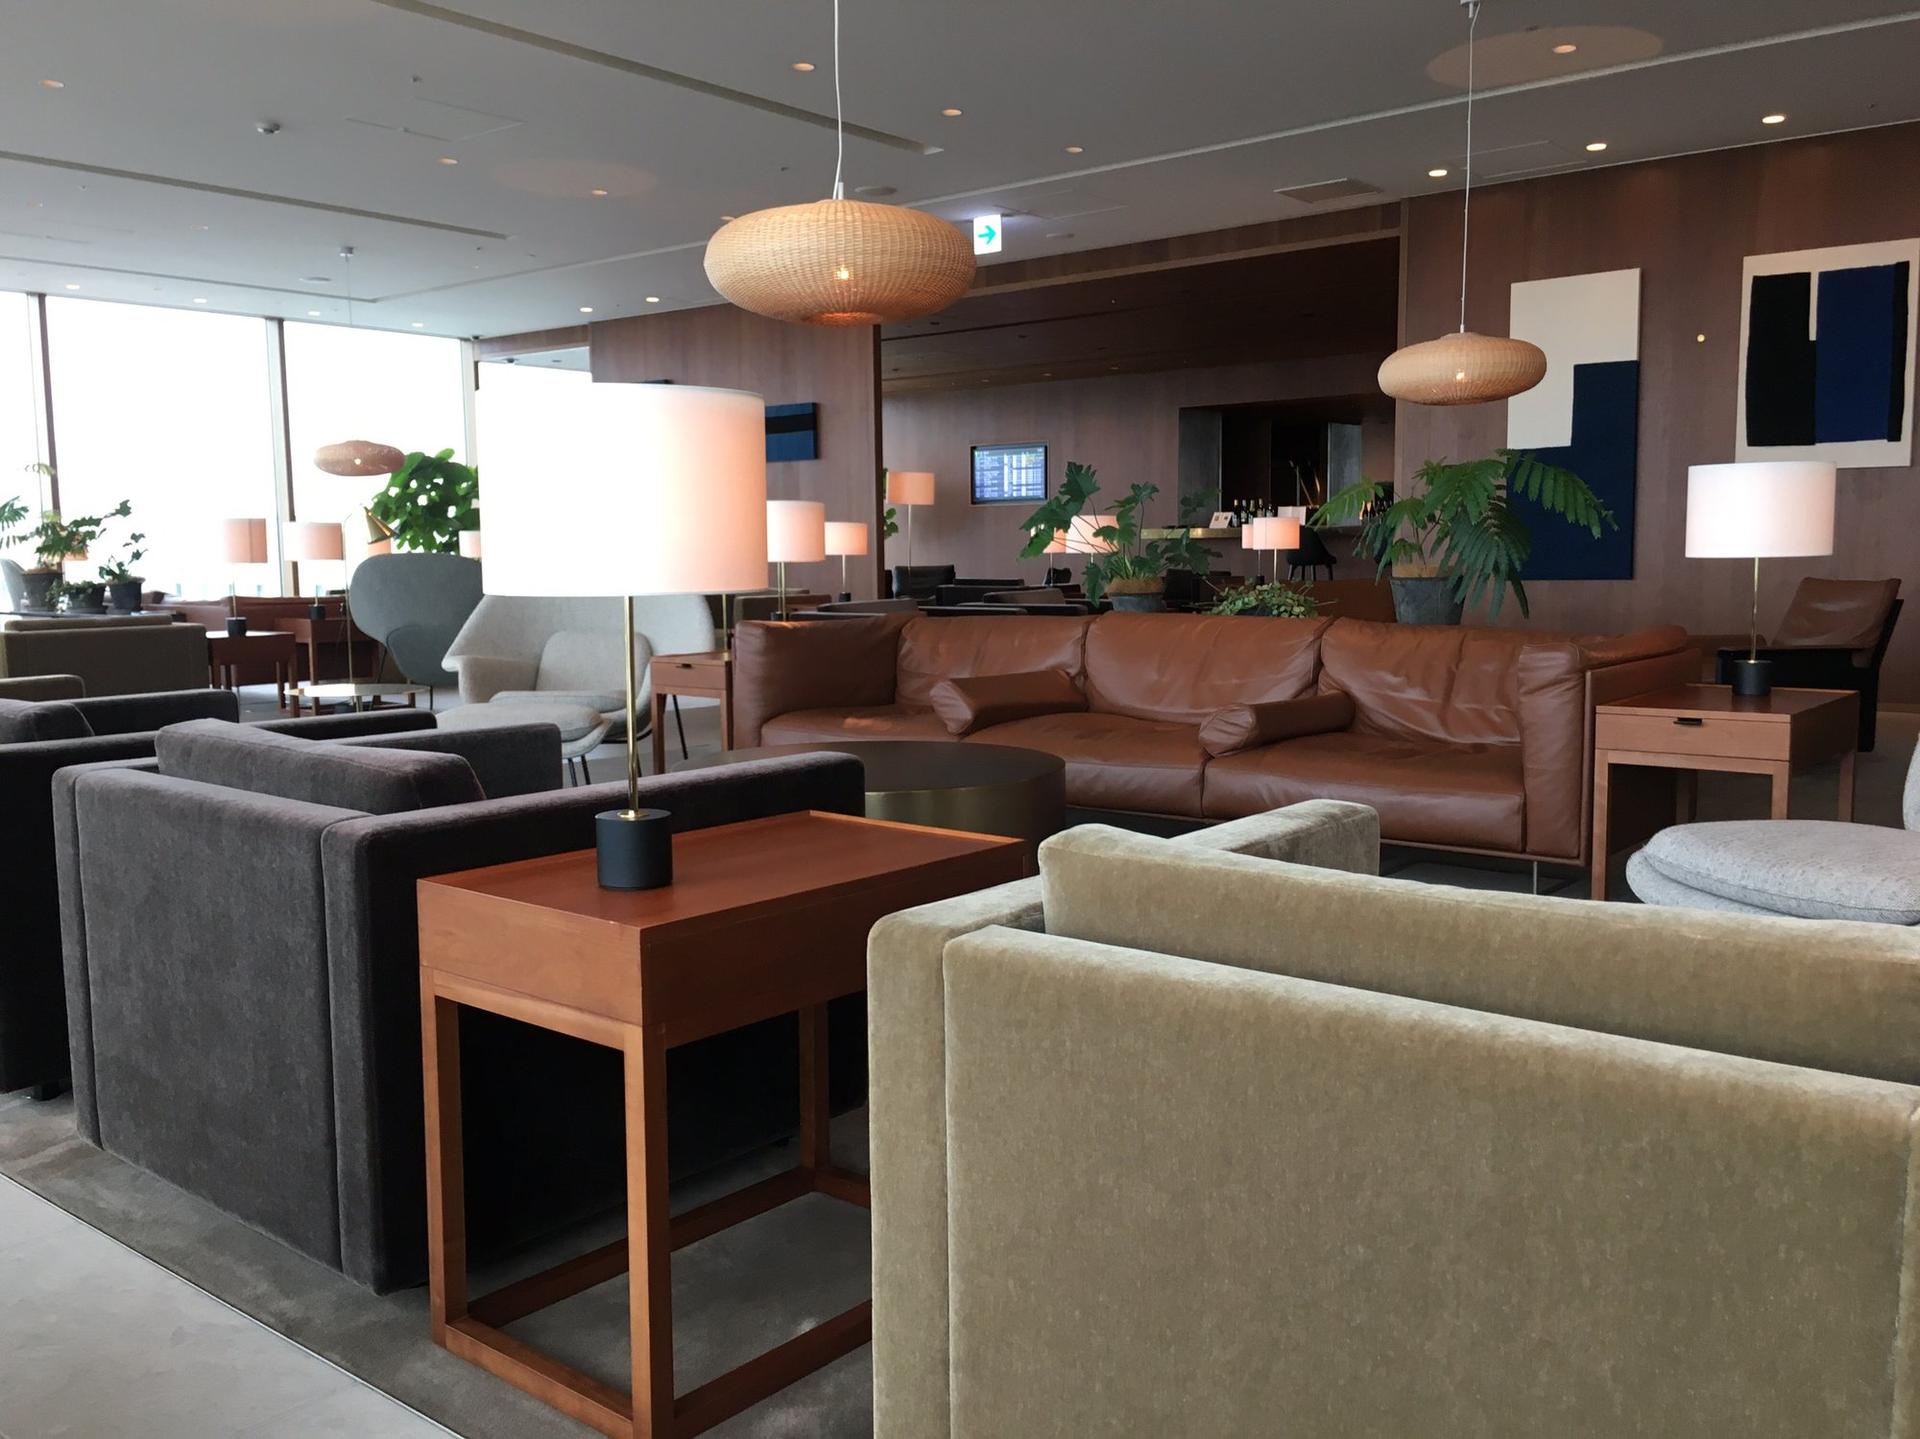 Cathay Pacific Lounge image 13 of 49